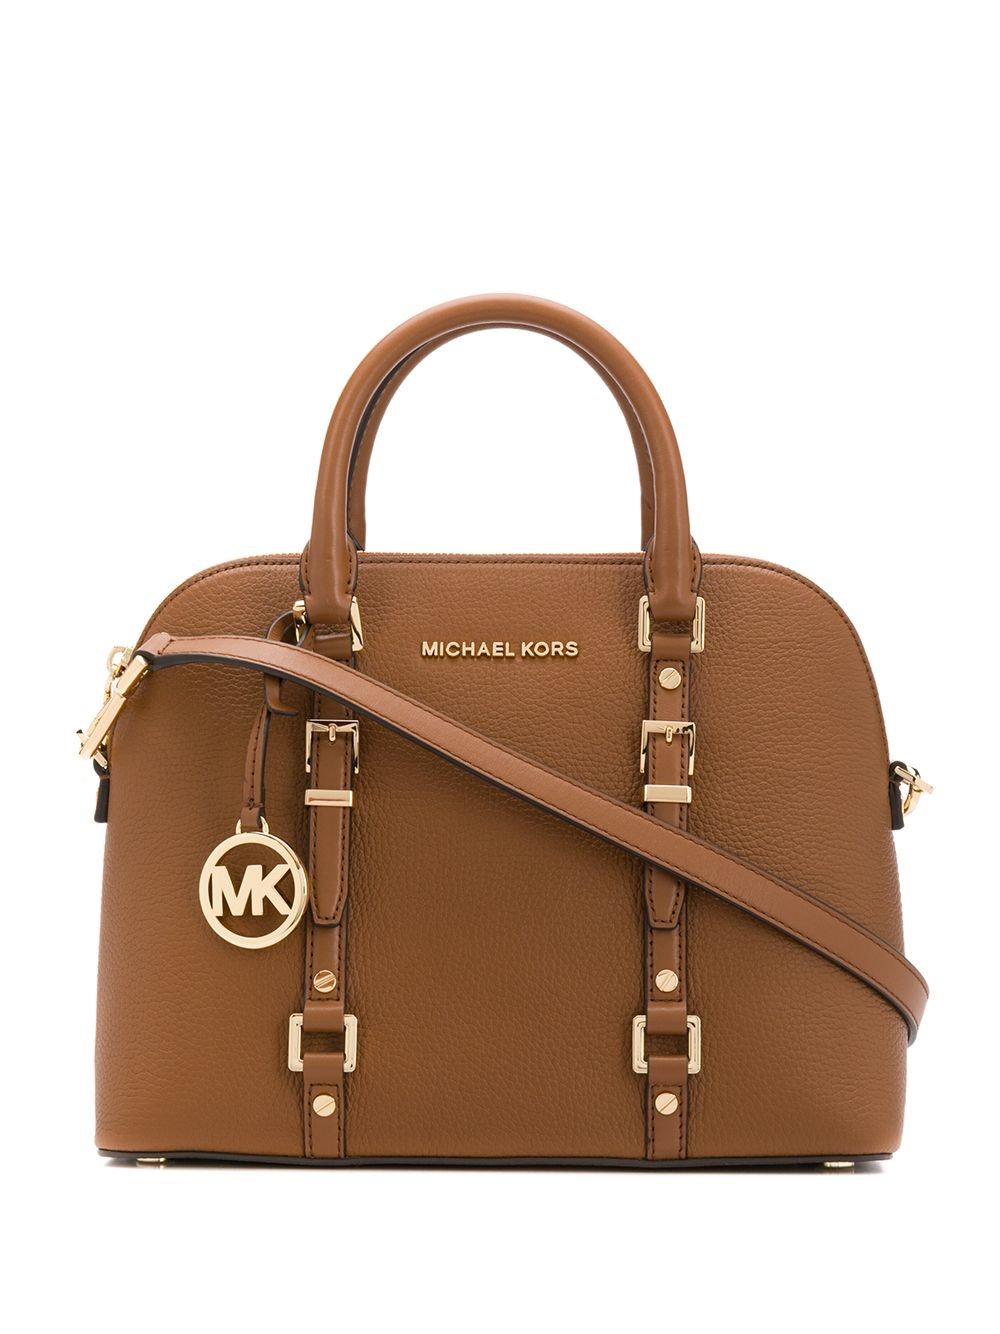 michael kors mk TOTE BAG available on montiboutique.com - 32562